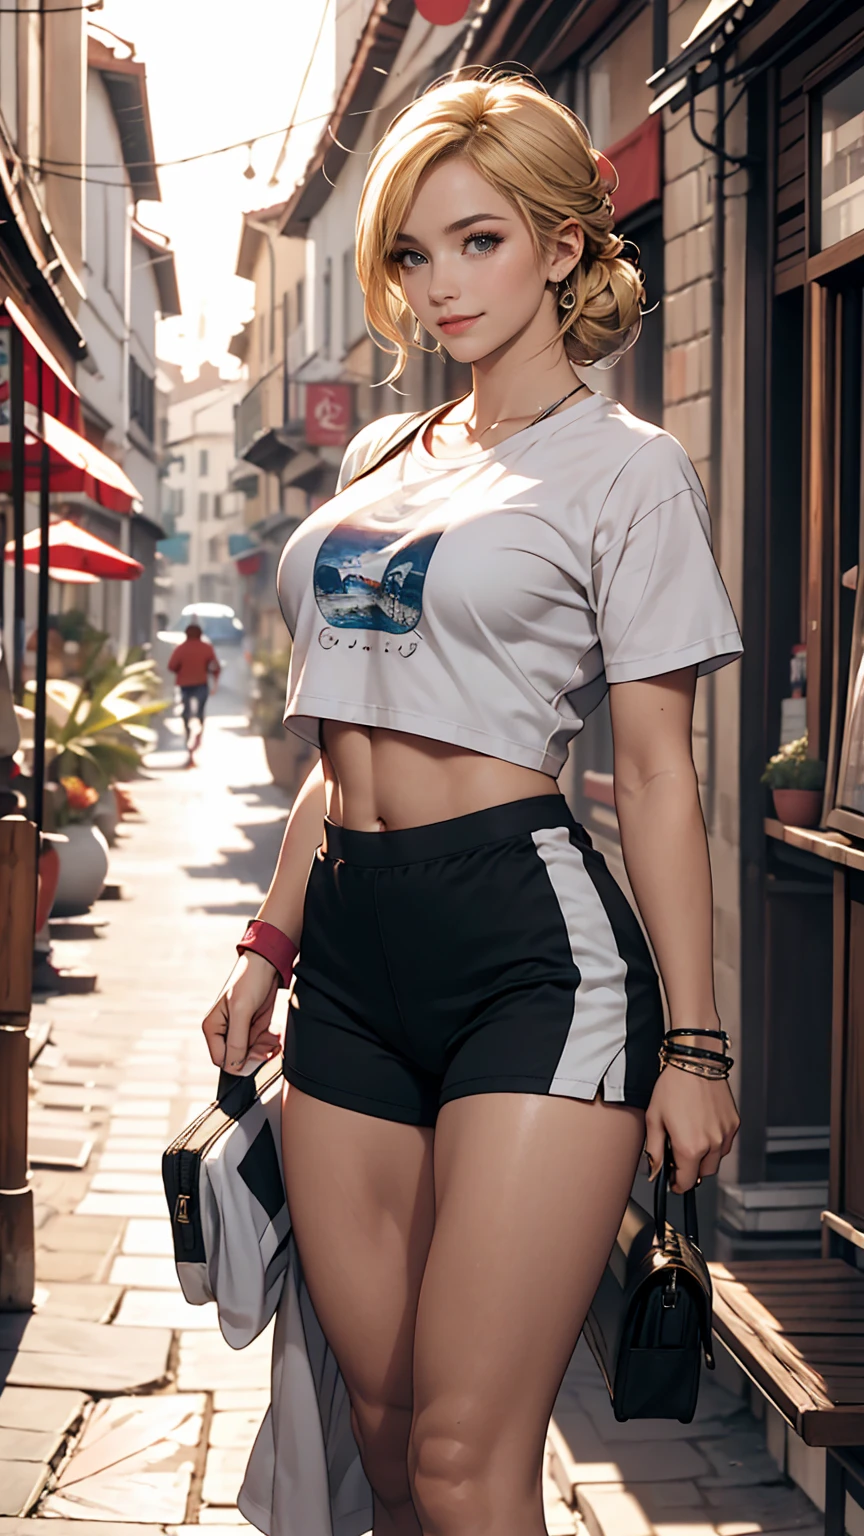 24 year old Caucasian female、hair color is blonde、Updo、Eye color is blue、A slim but muscular body、she&#39;She is wearing a T-shirt that shows her underboob.、Belly button sticking out、My abdominal muscles cracked、smile、In the intricate alleys of a traditional white-walled town on the Aegean coast、Wear a wristband、I&#39;man wearing low rise leggings、I&#39;Wearing running shoes